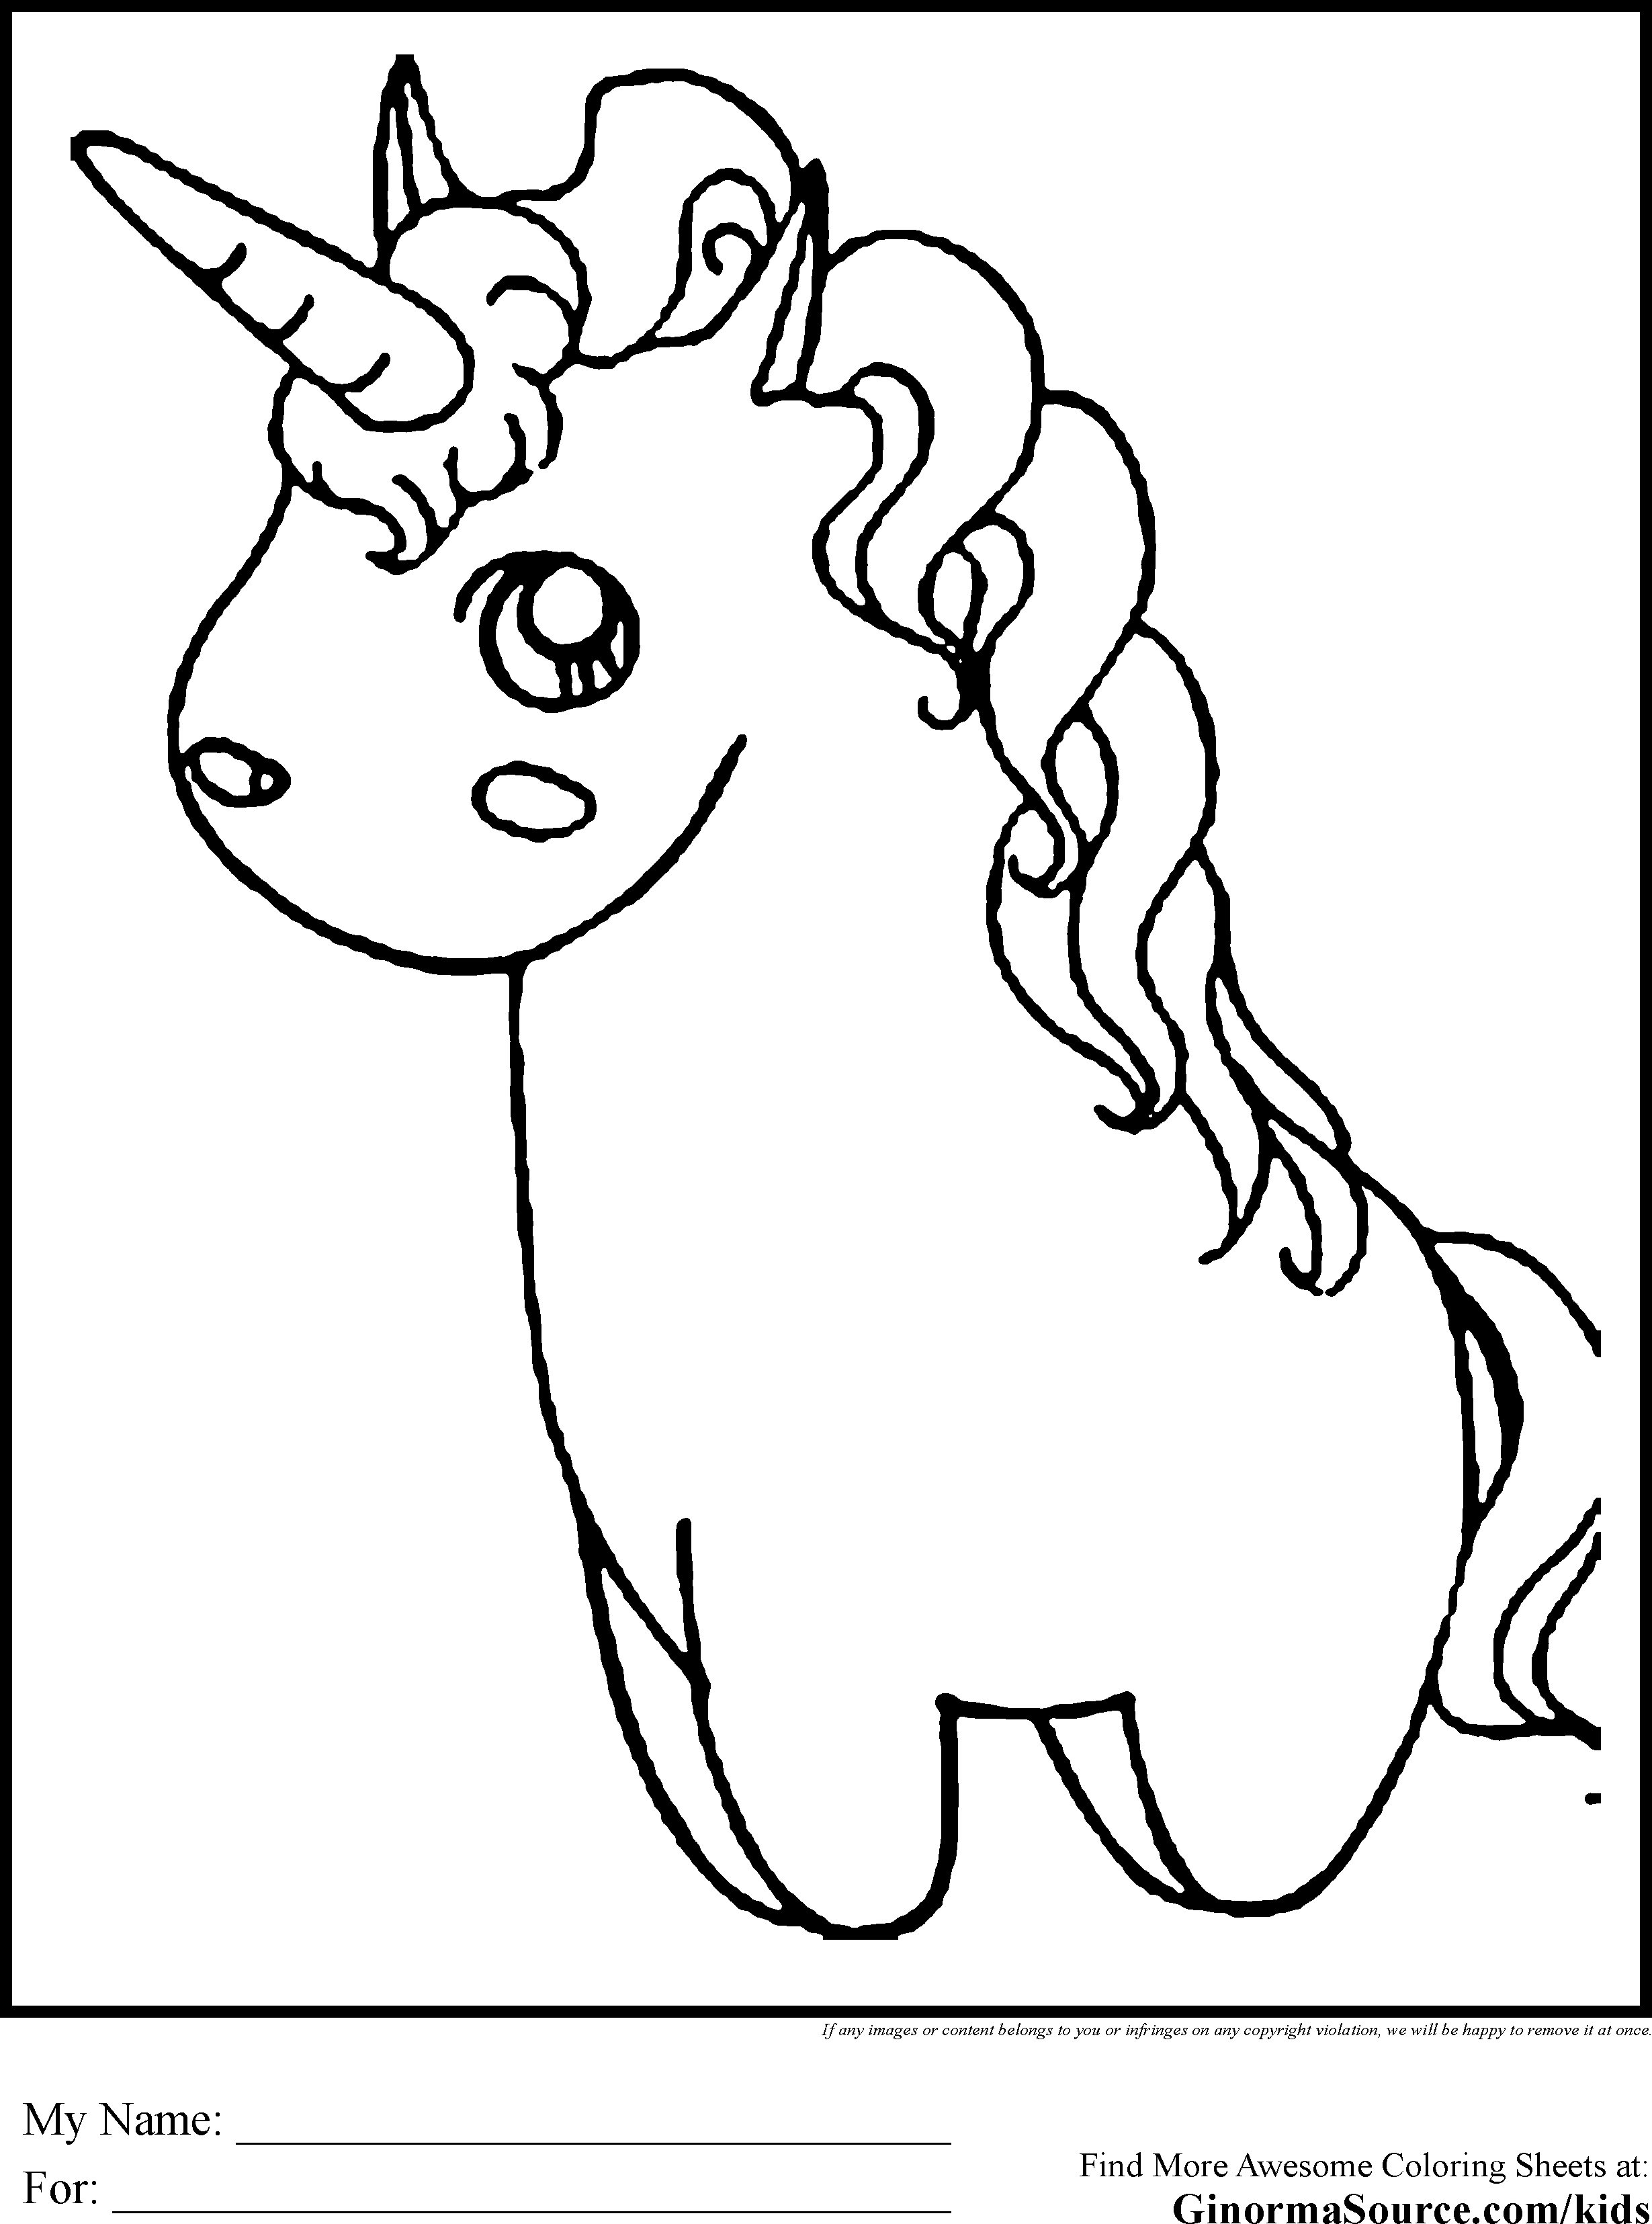 Adorable Baby Unicorn Coloring Pages - Coloring Pages For All Ages